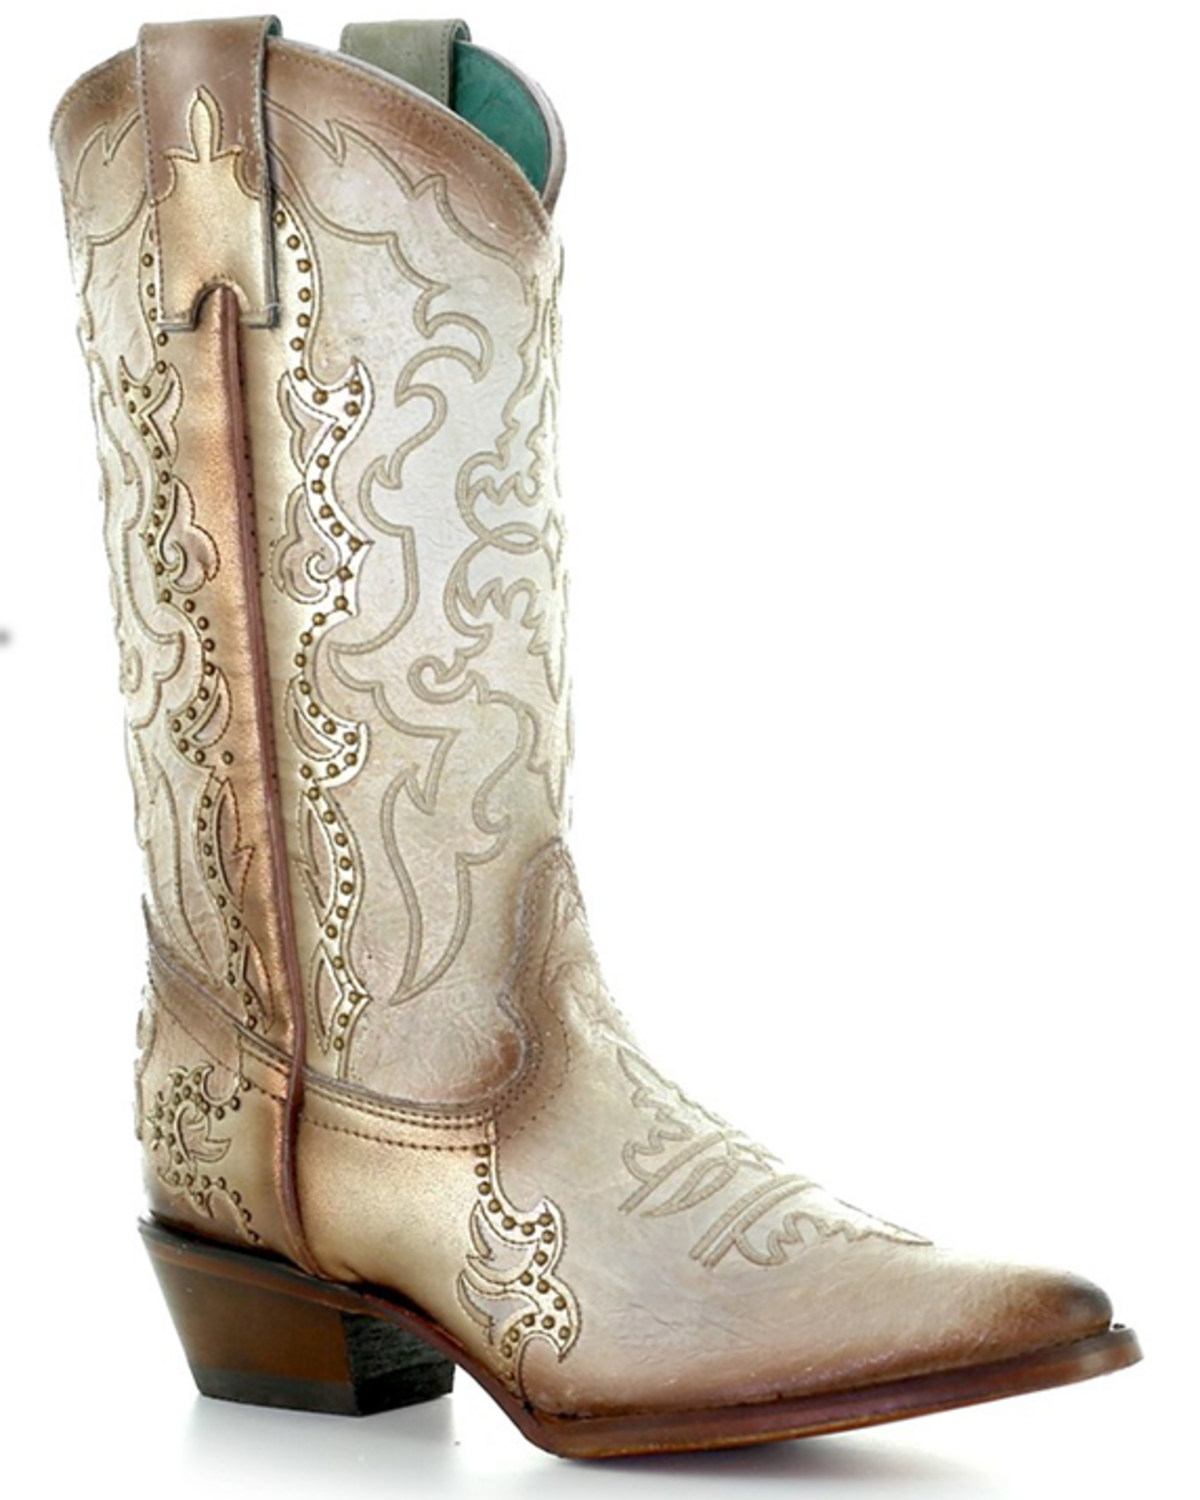 Corral Women's Studded Overlay Western Boots - Pointed Toe